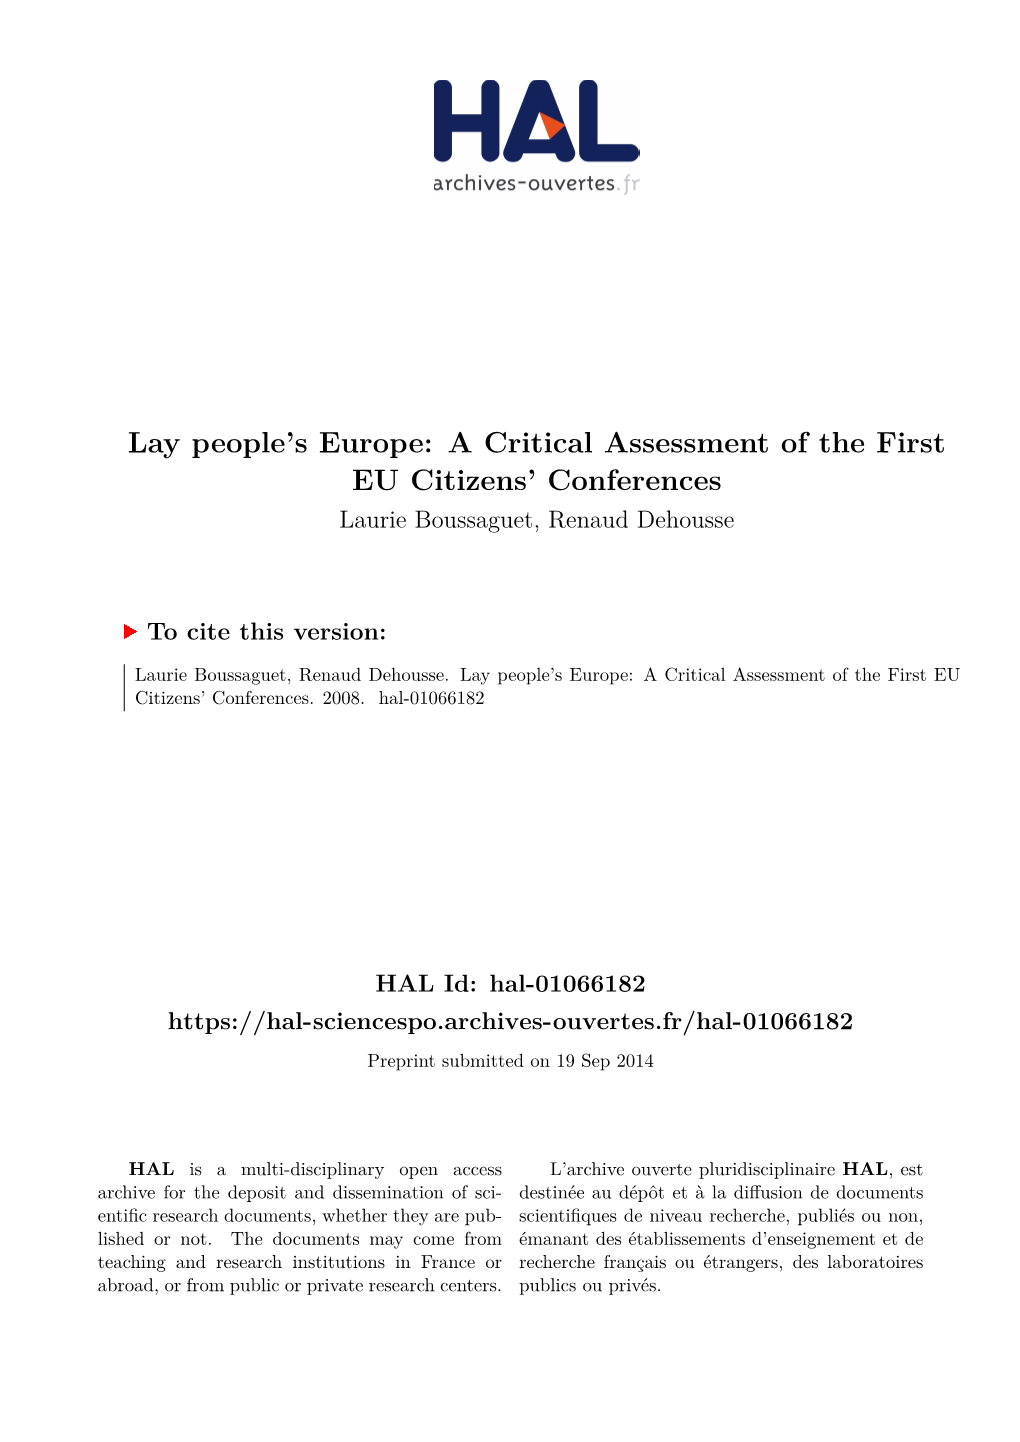 A Critical Assessment of the First EU Citizens' Conferences